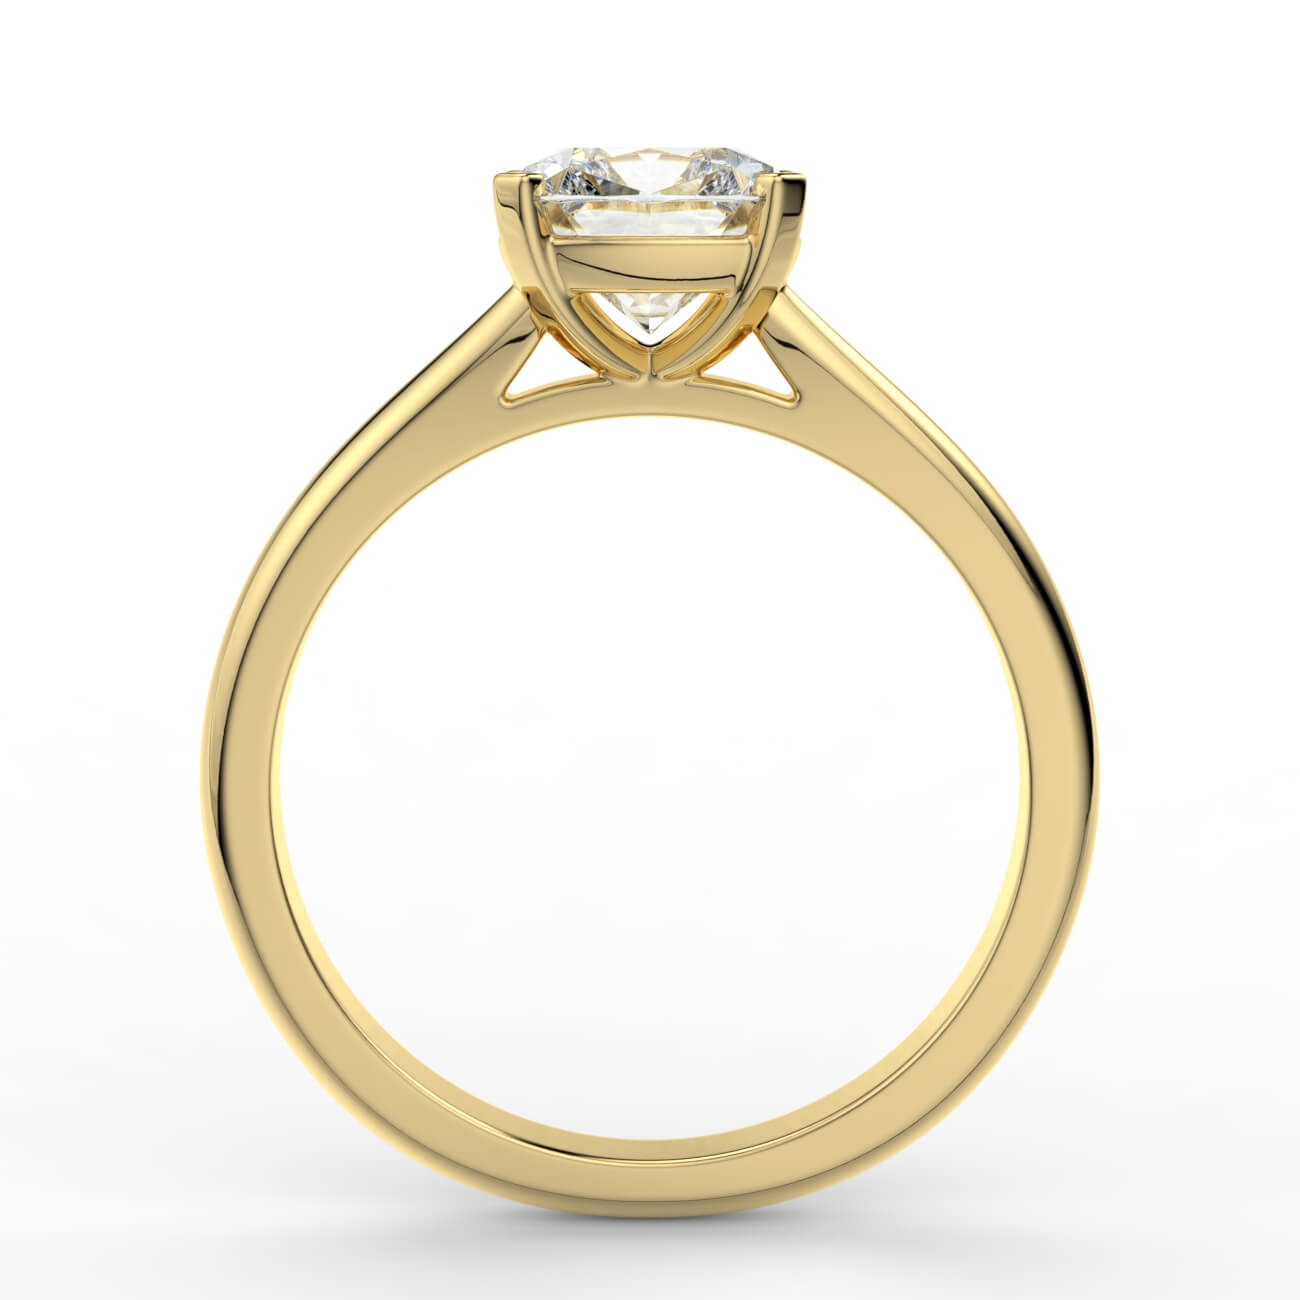 Cushion cut diamond cathedral engagement ring in yellow gold – Australian Diamond Network